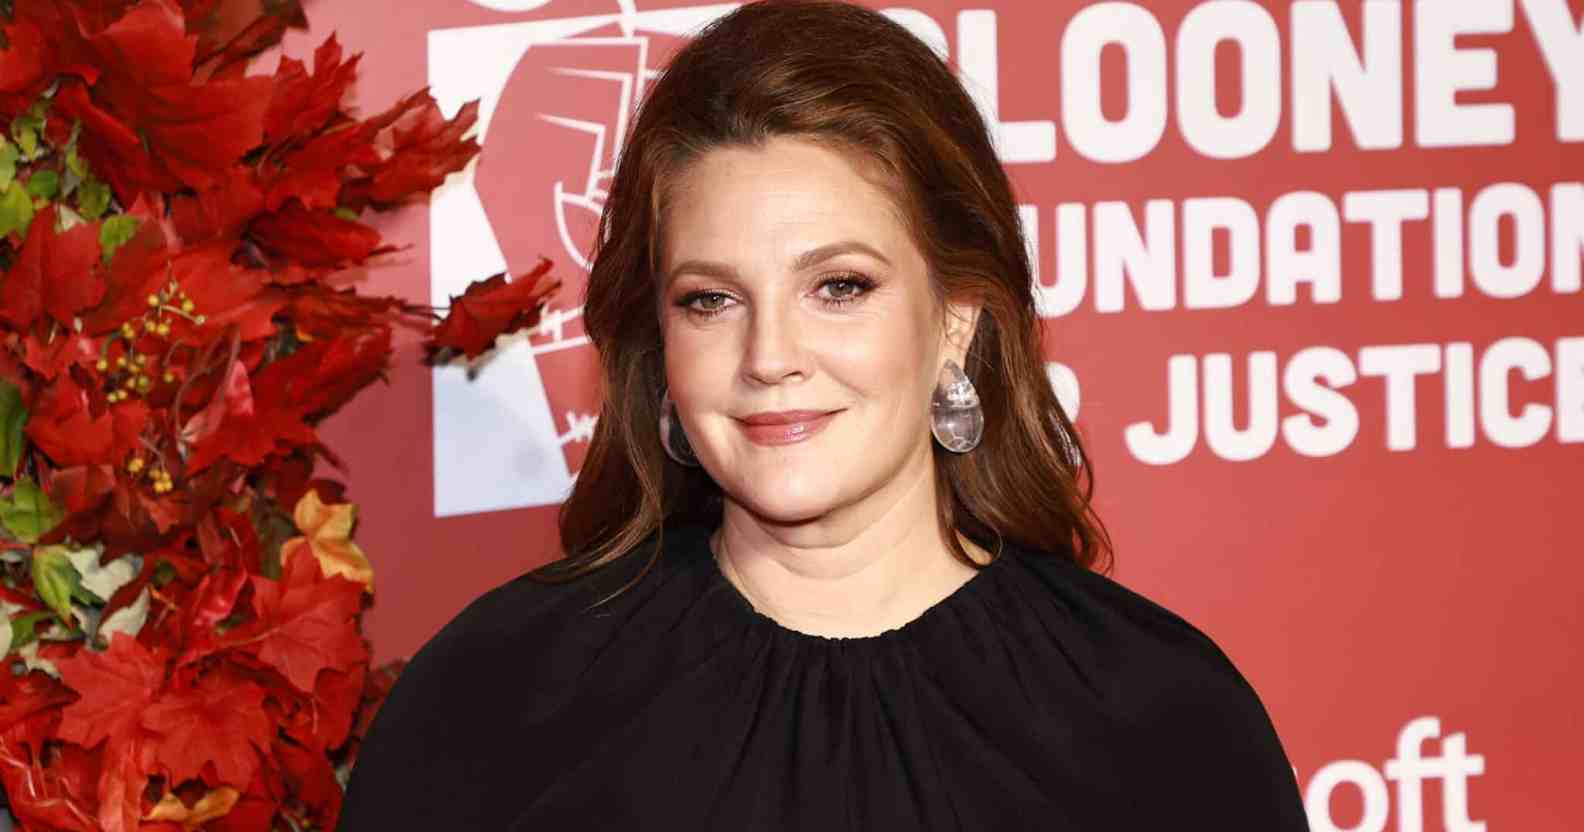 Drew Barrymore has explained she is 'not a person who needs sex' post-divorce